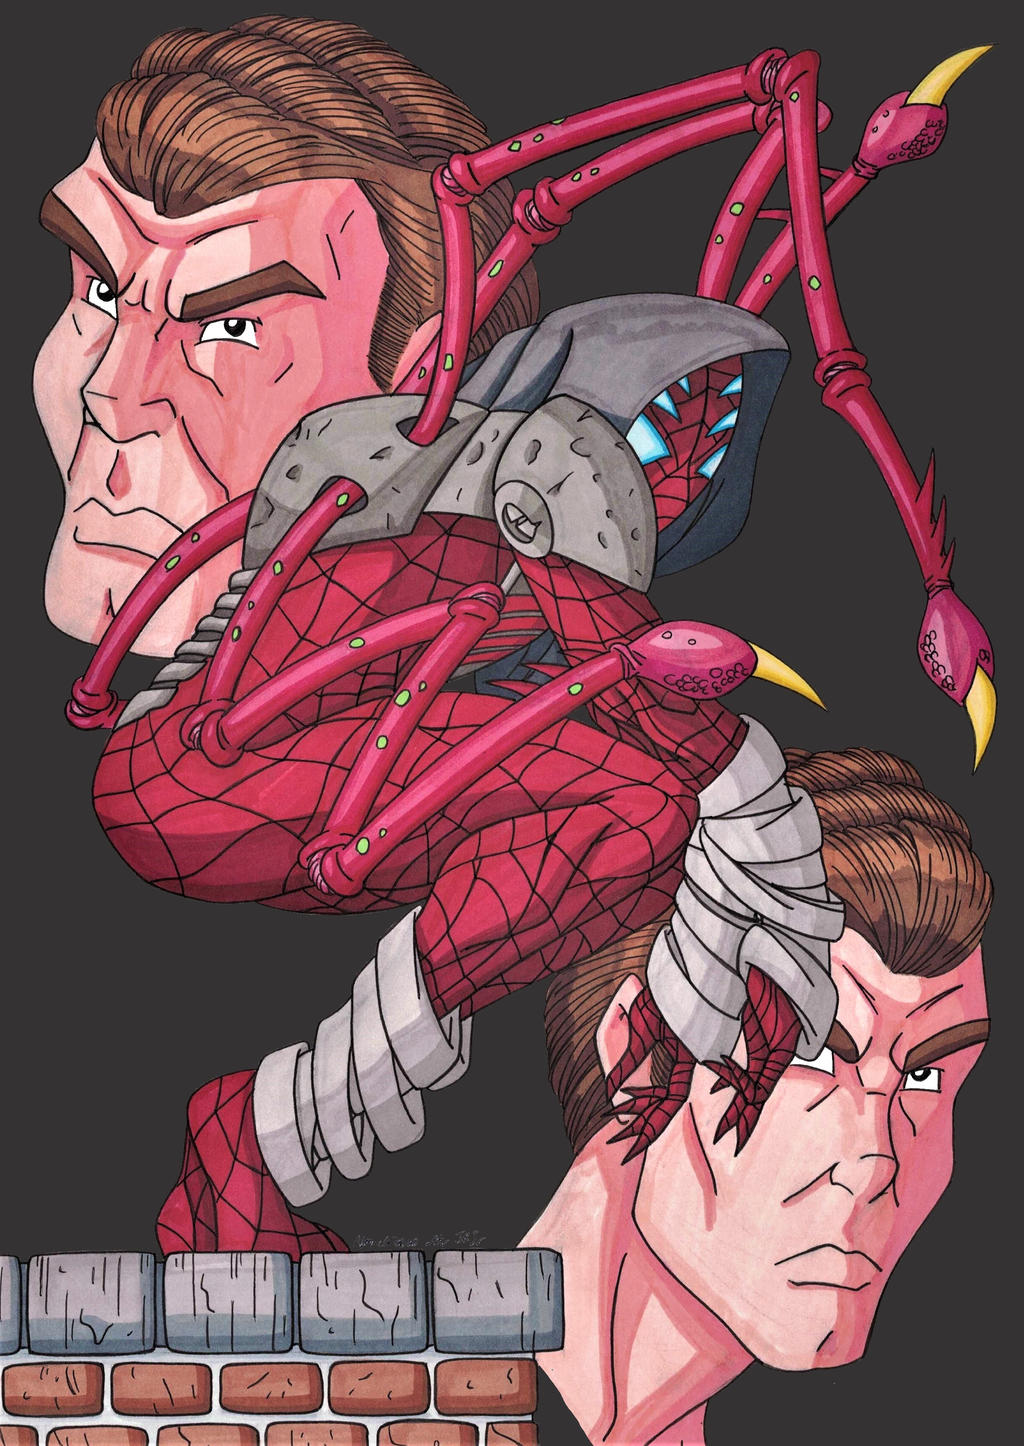 Spider-Man and his Amazing Friends by RobertMacQuarrie1 on DeviantArt